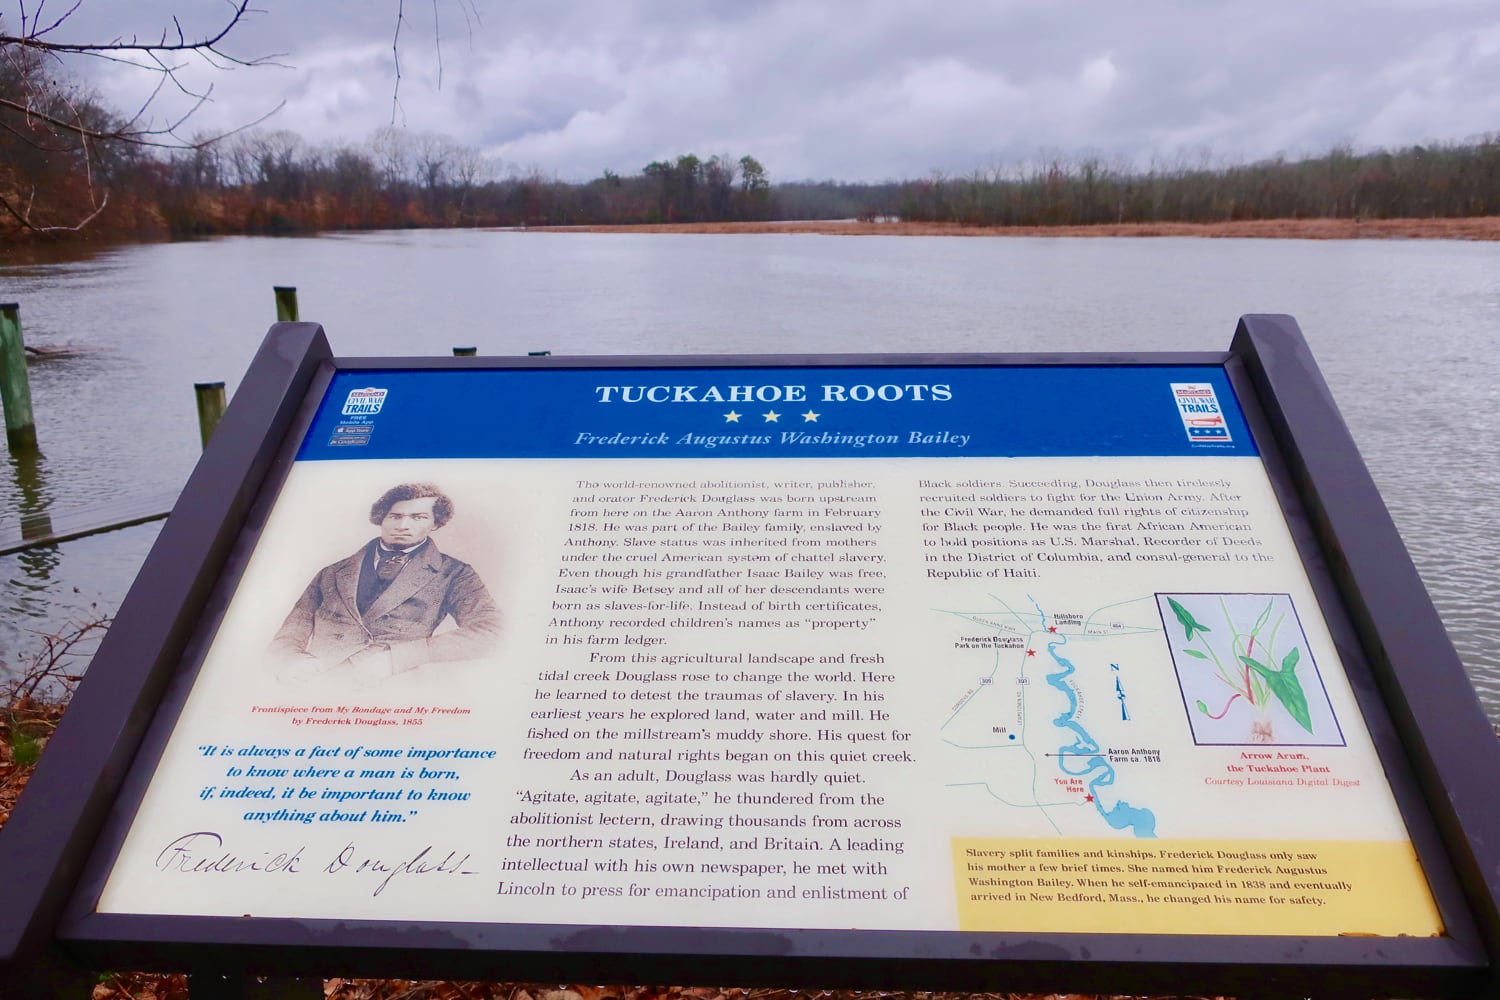 Frederick Douglass information panel near his birthplace on the Tuckahoe River Easton MD